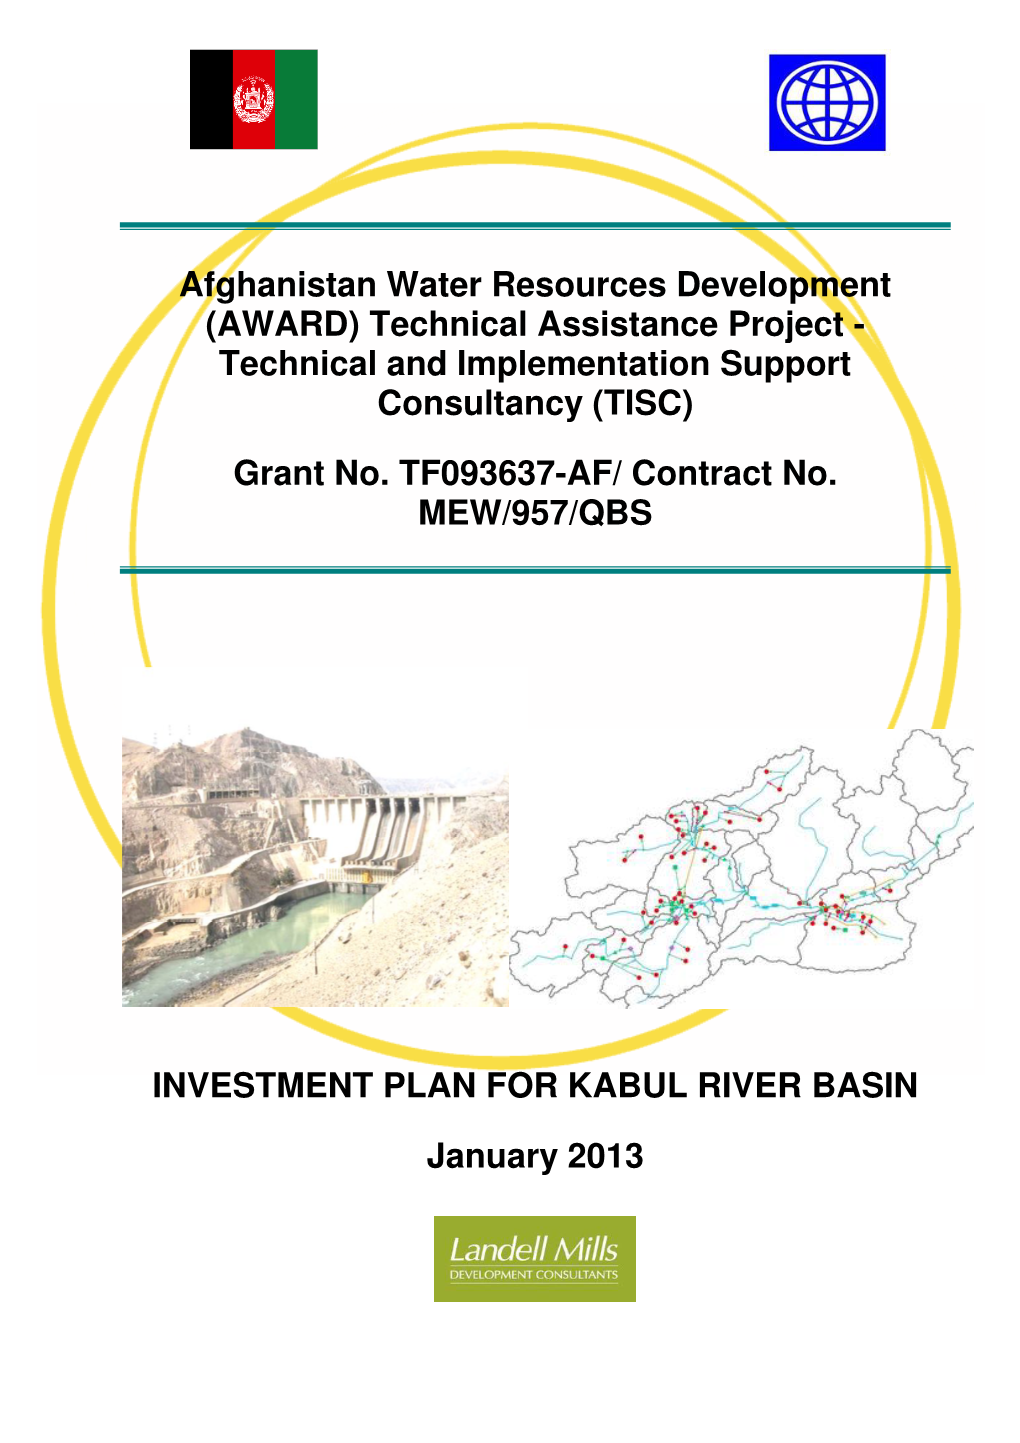 Afghanistan Water Resources Development (AWARD) Technical Assistance Project - Technical and Implementation Support Consultancy (TISC)